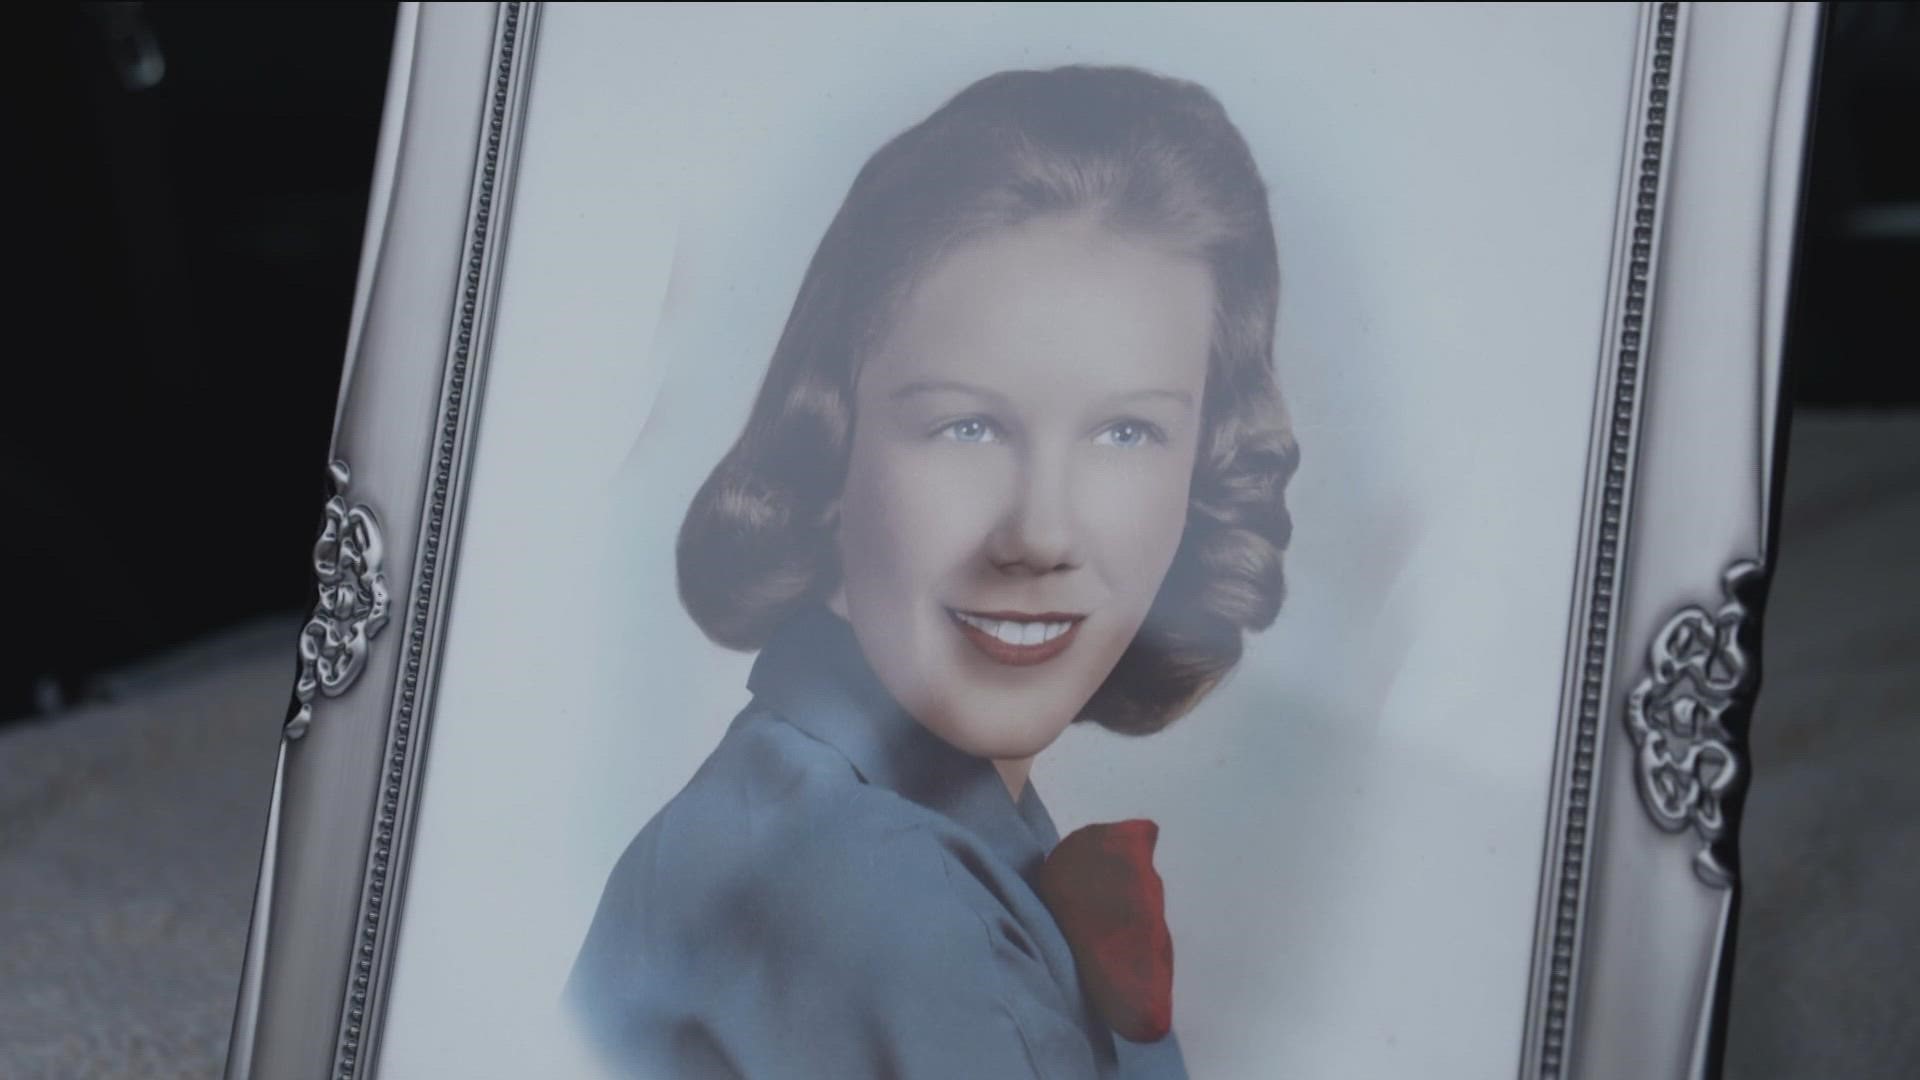 Nancy Eagleson was 14 years old when she was abducted while walking home from the movies with her sister on Nov. 13, 1960. Family believes there may be DNA evidence.